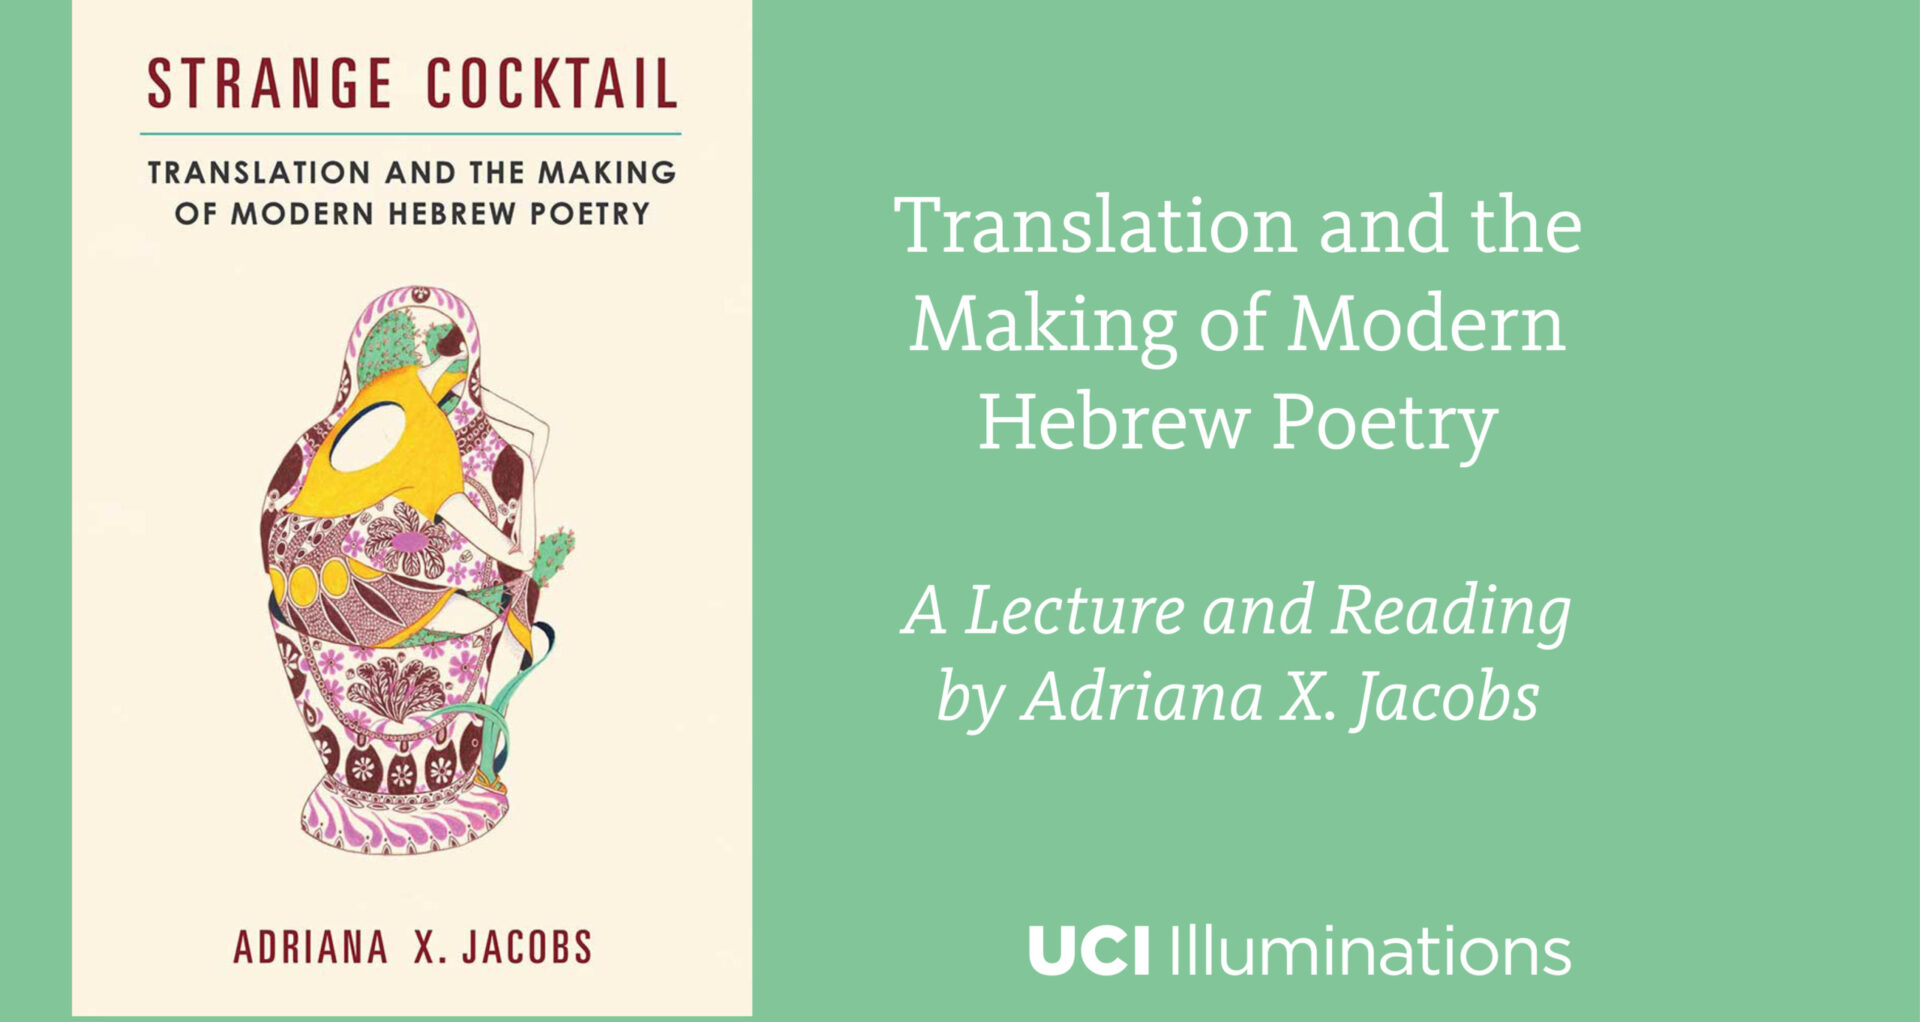 Translation and the Making of Modern Hebrew Poetry